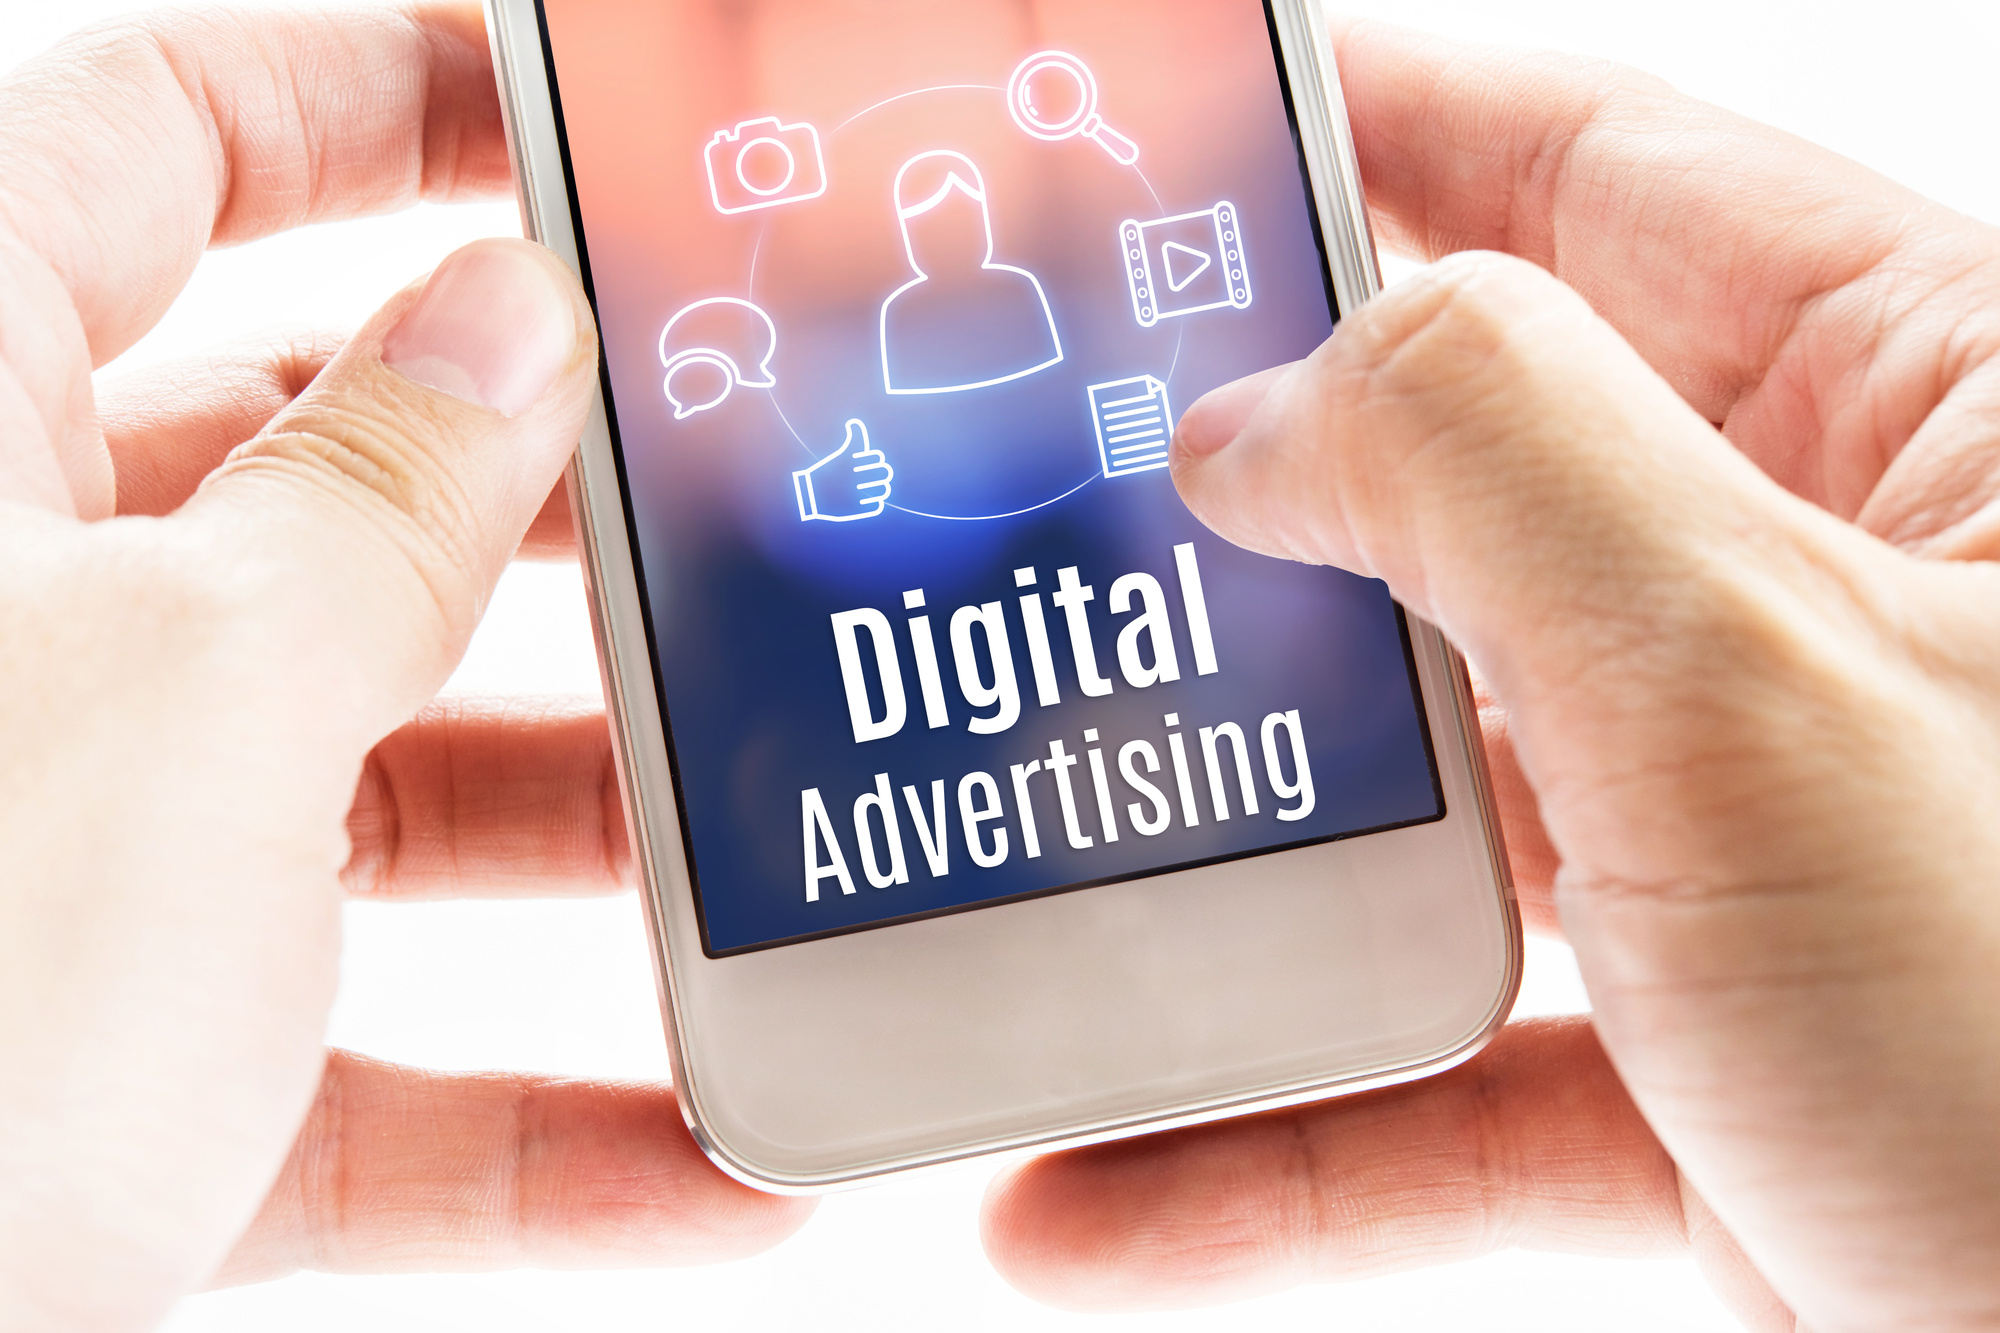 Are you looking for ways to change up your company's digital advertisements? Read here for the ultimate guide to digital advertising in 2022 for some new ideas.